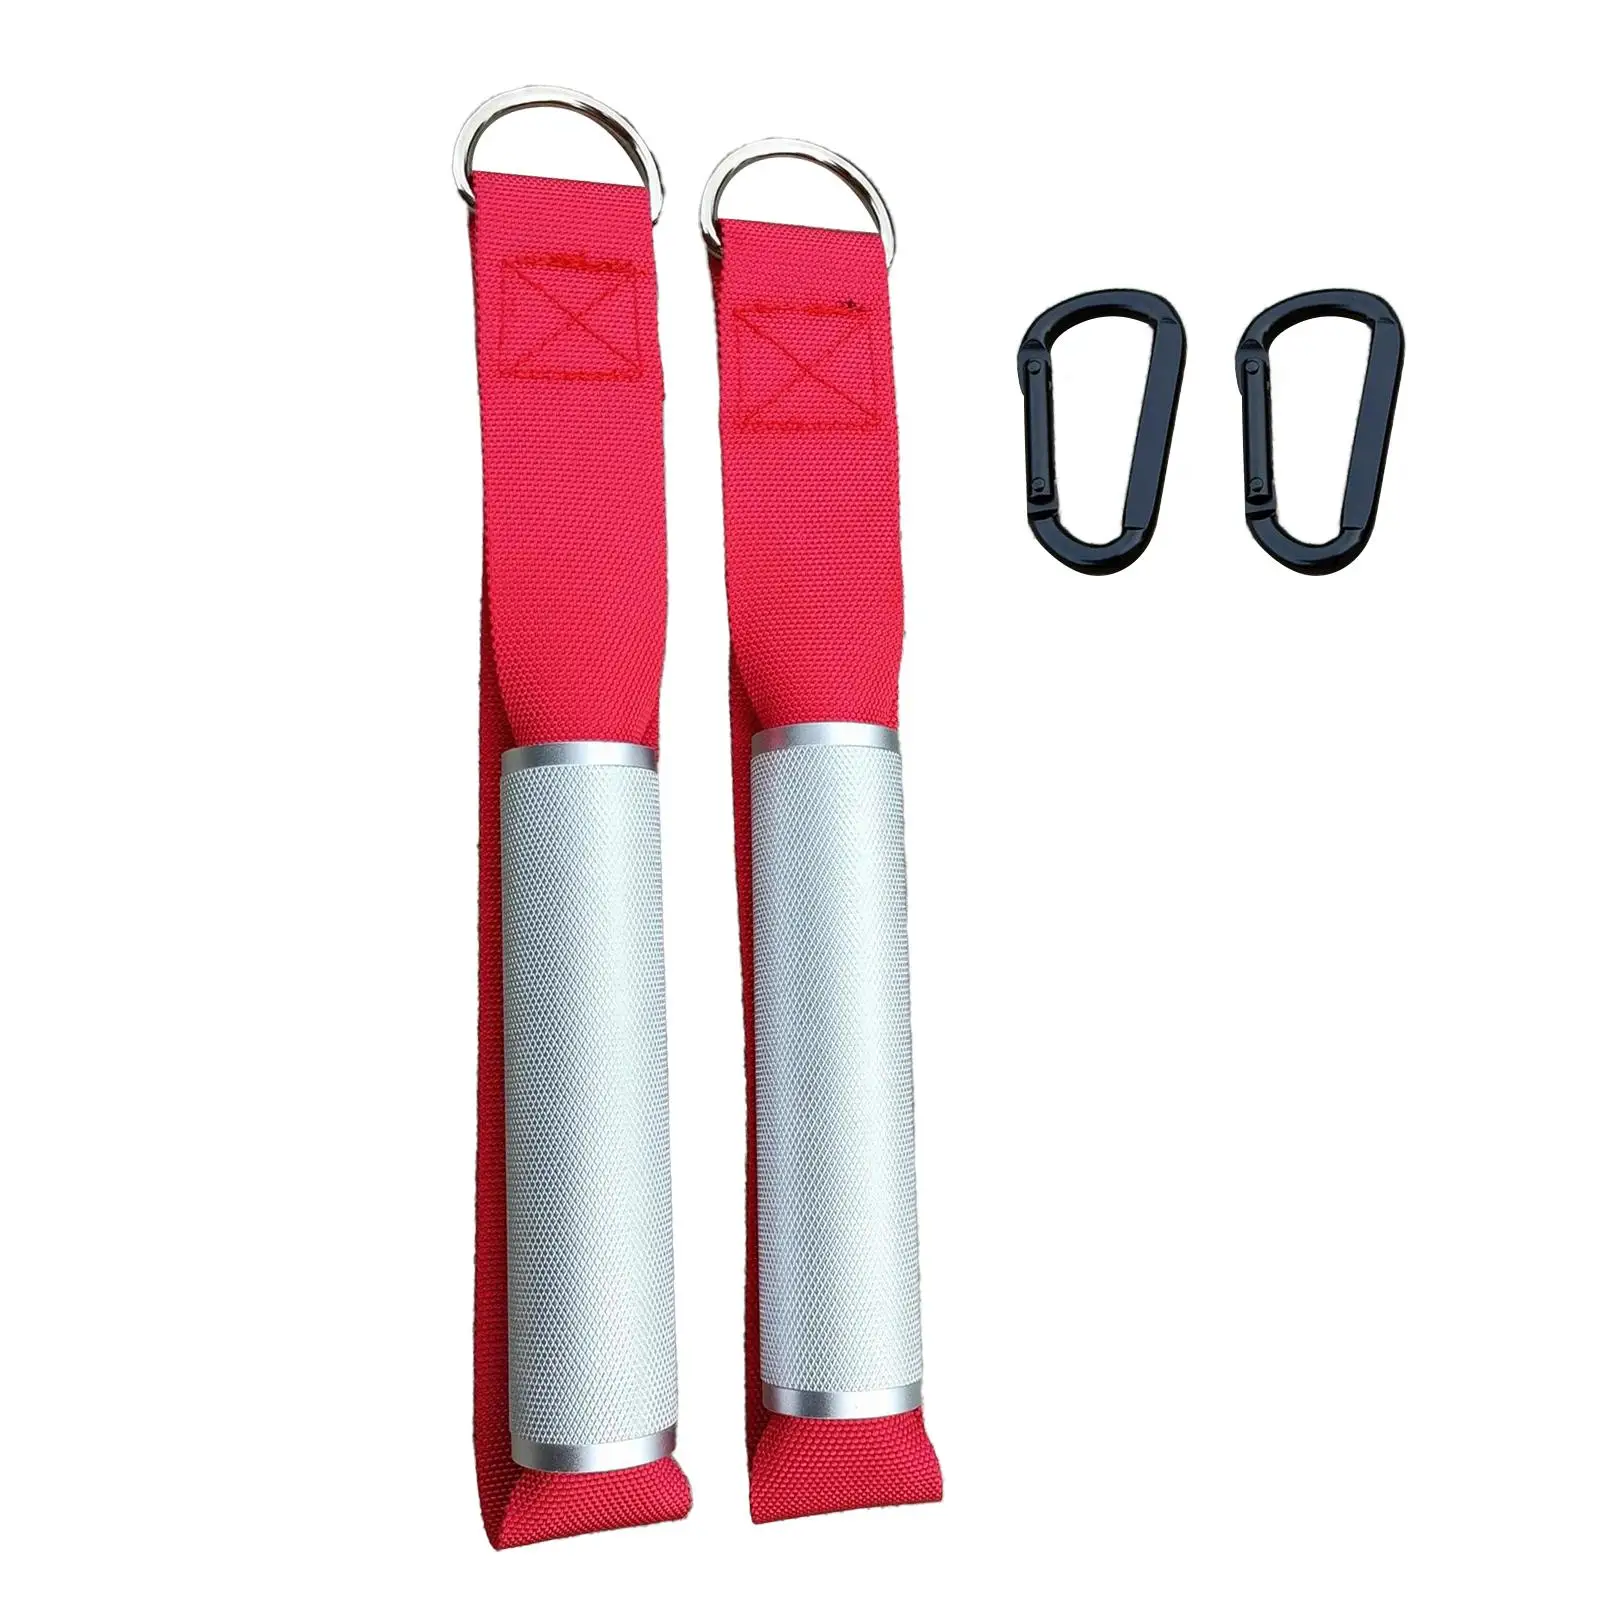 2x Gym Handles Chest Fitness Accs Resistance Exercise Gymnastics Hanging Exercise Device Metal for Strength Trainer Yoga Pilates